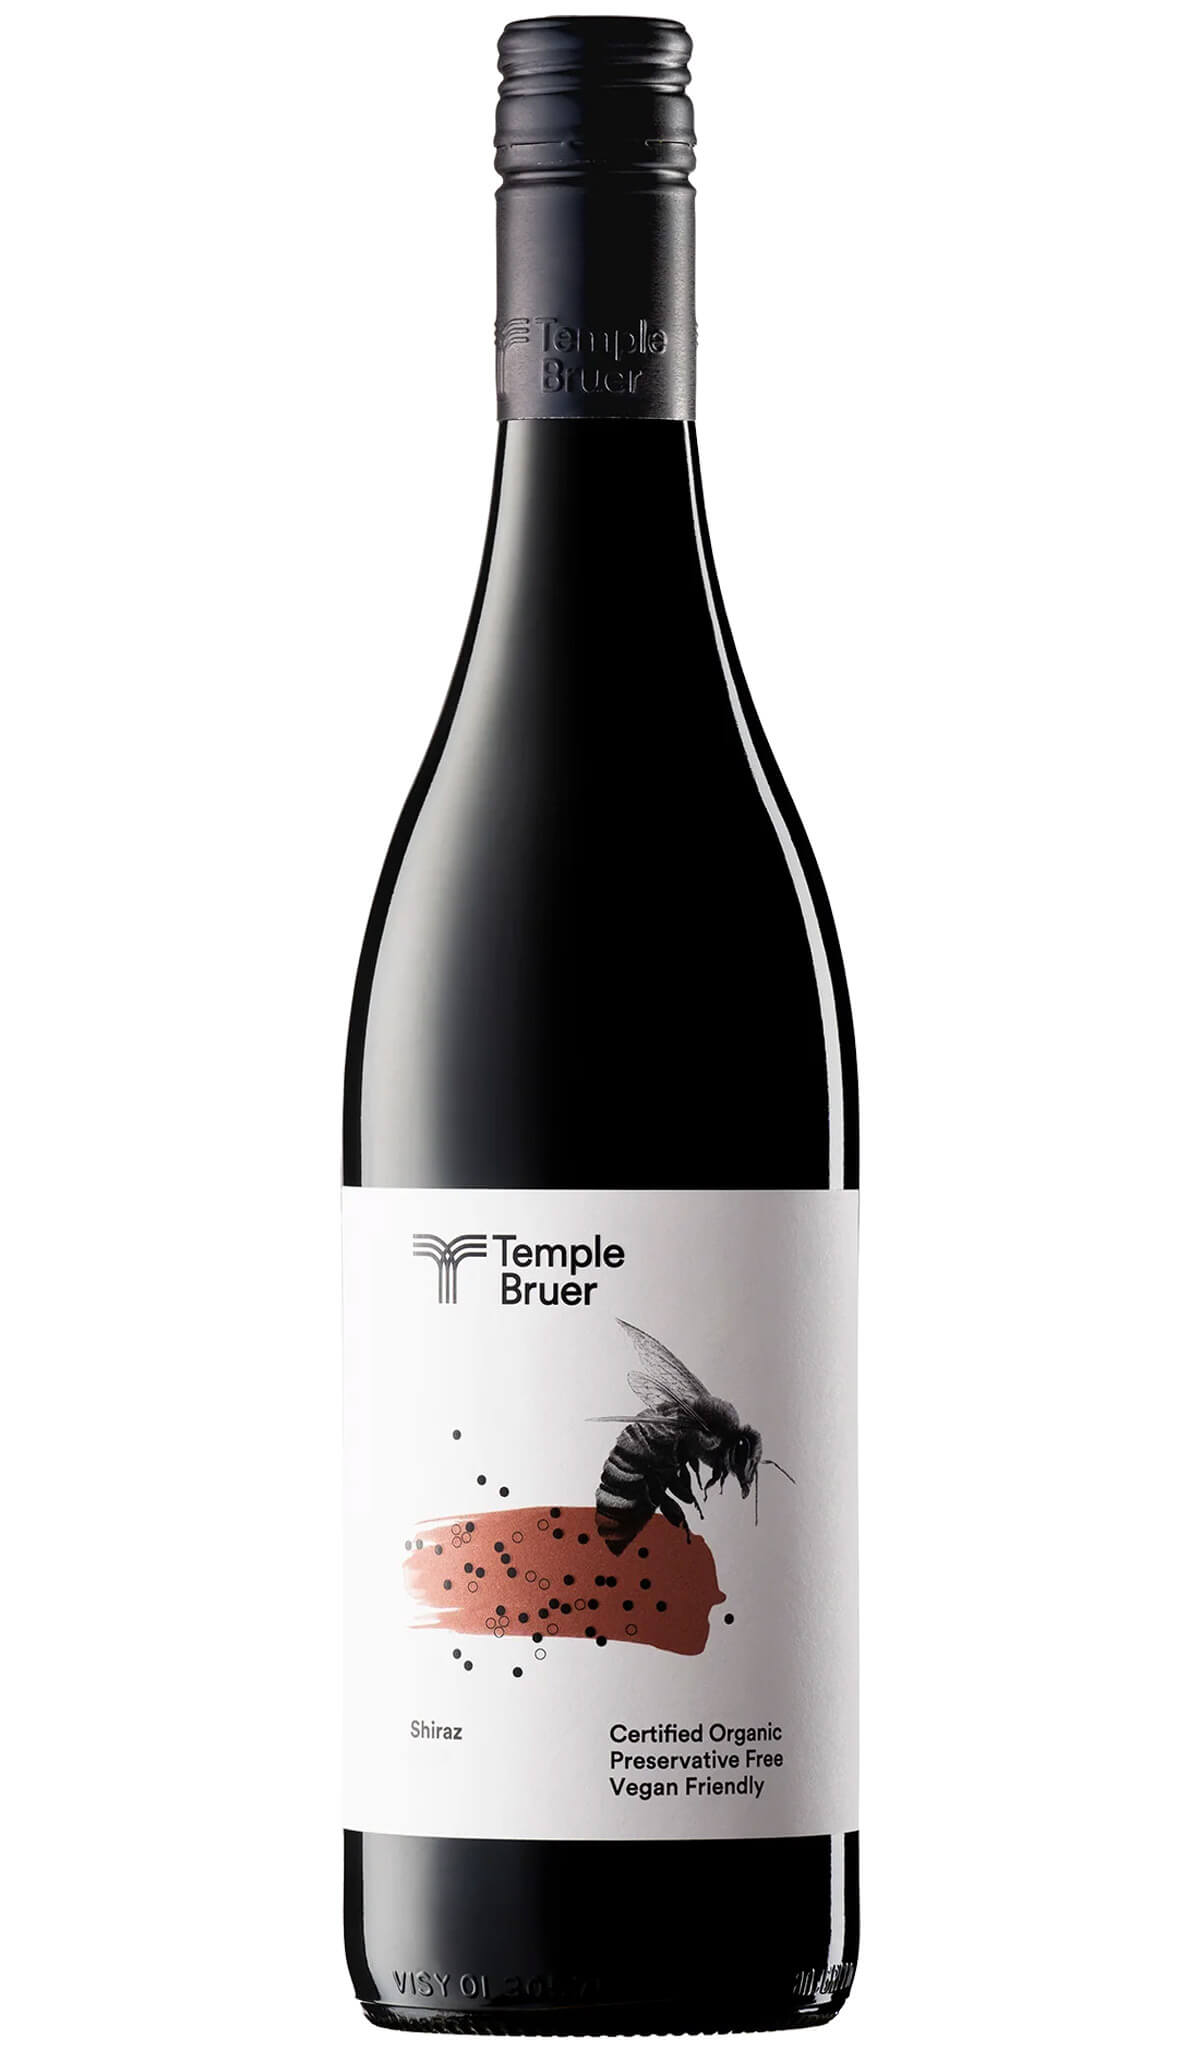 Find out more or buy Temple Bruer Shiraz 2022 (Preservative Free, Organic & Vegan) online at Wine Sellers Direct - Australia’s independent liquor specialists.